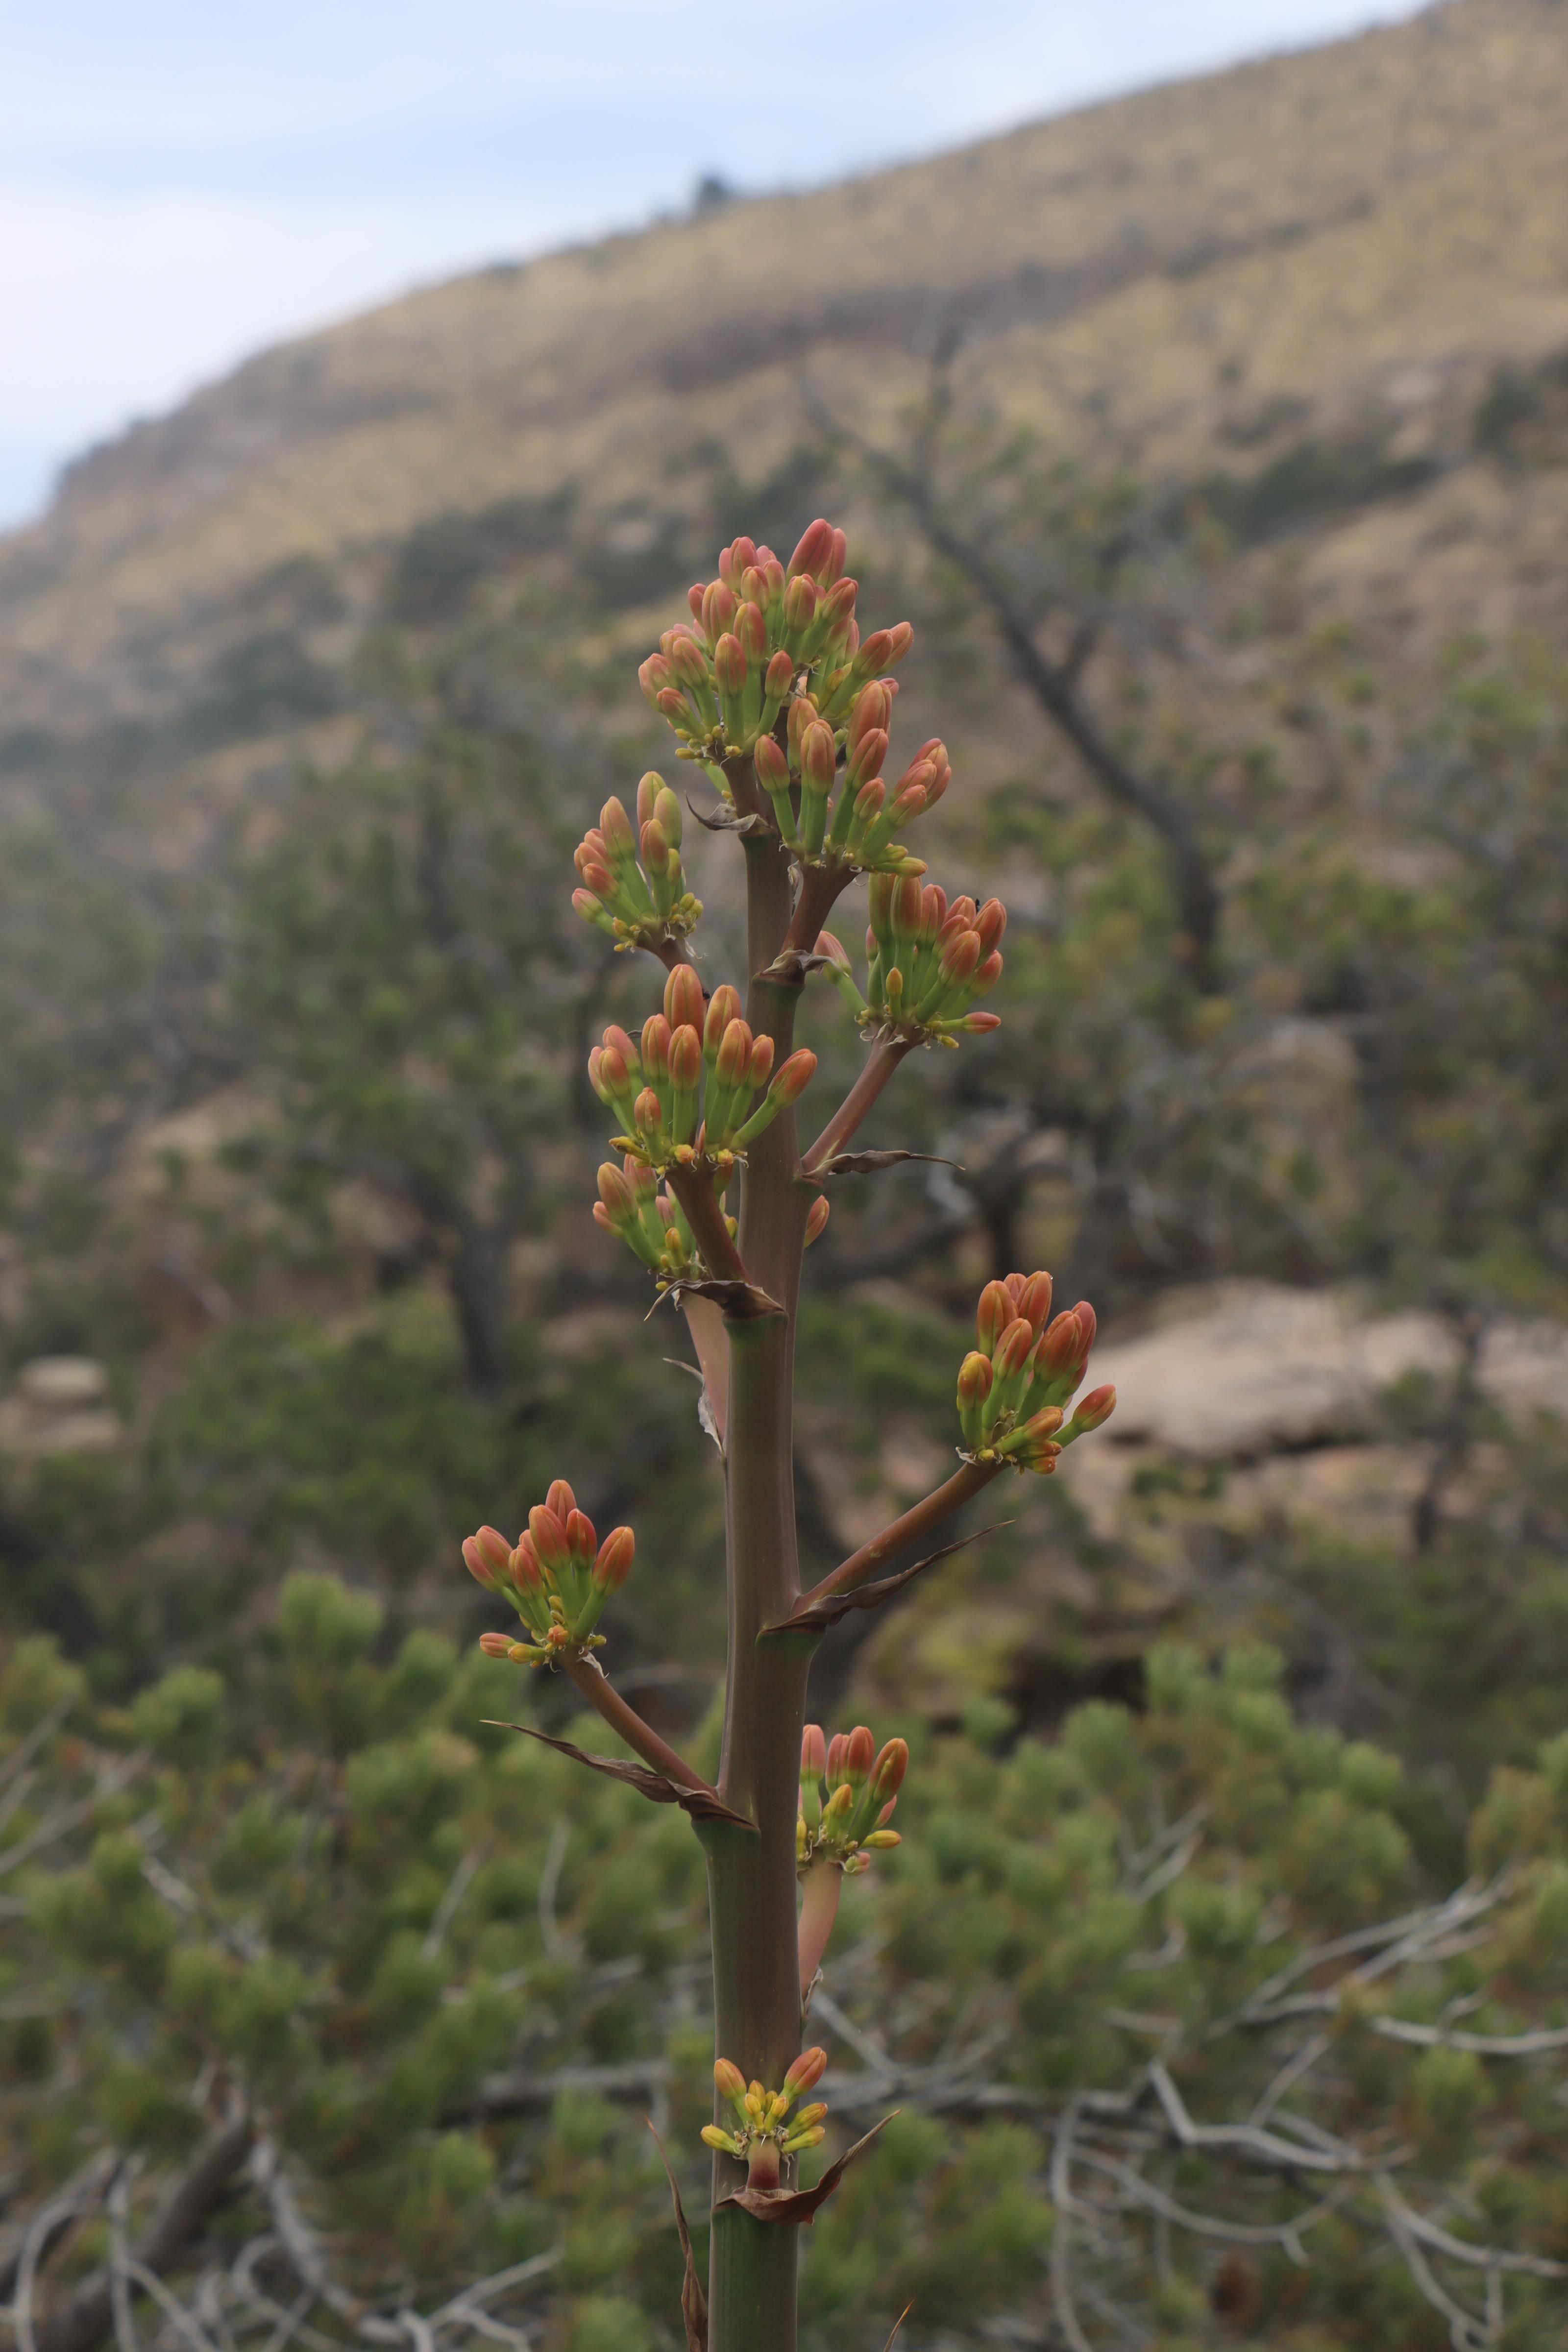 Photo by Jonathan Sensibar  |  The flowering stem of an agave against the rocky background of the Chiricahua mountains